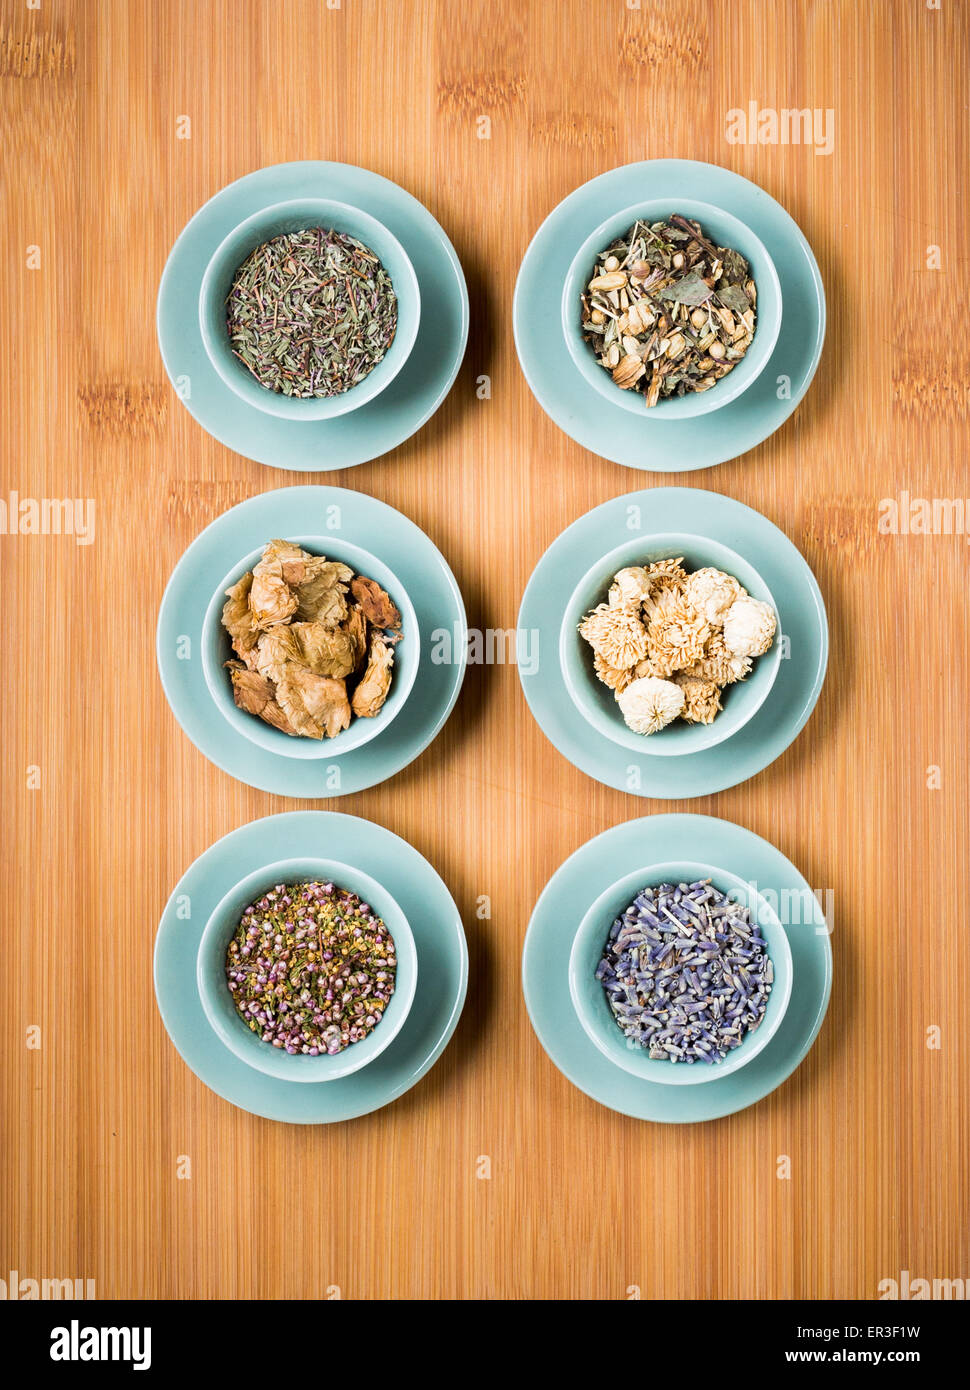 Medicinal herbs, assortment of dried herbs. Stock Photo